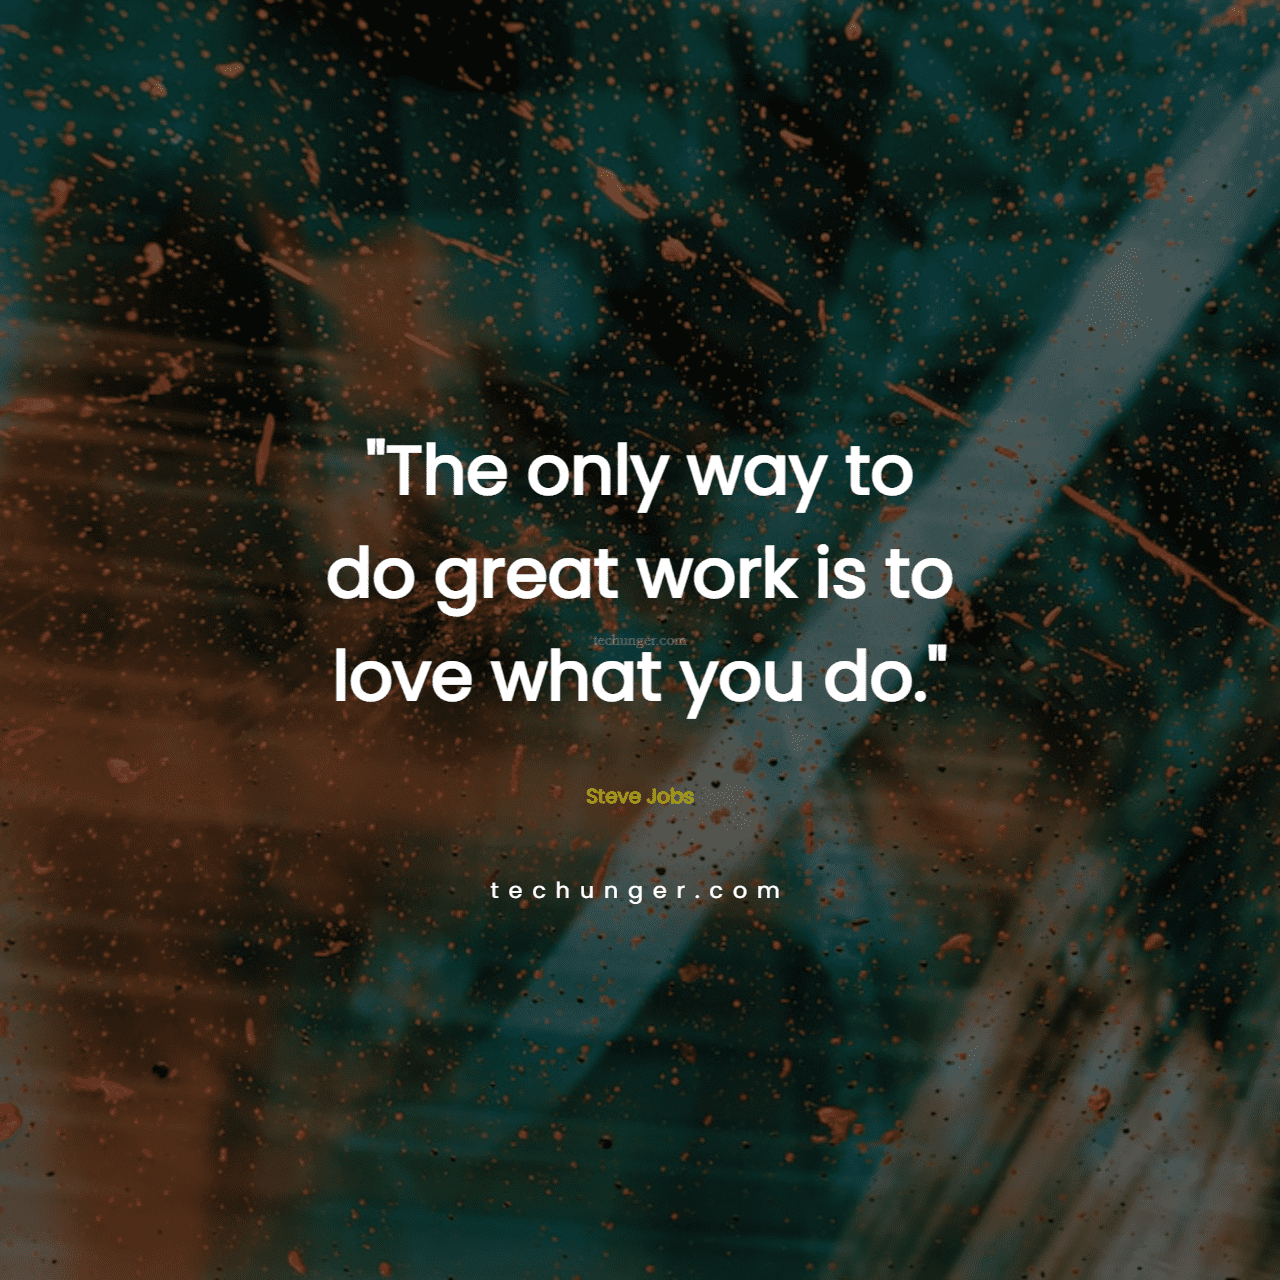 motivational,inspirational,quotes,The only way to do great work is to love what you do.
Steve Jobs